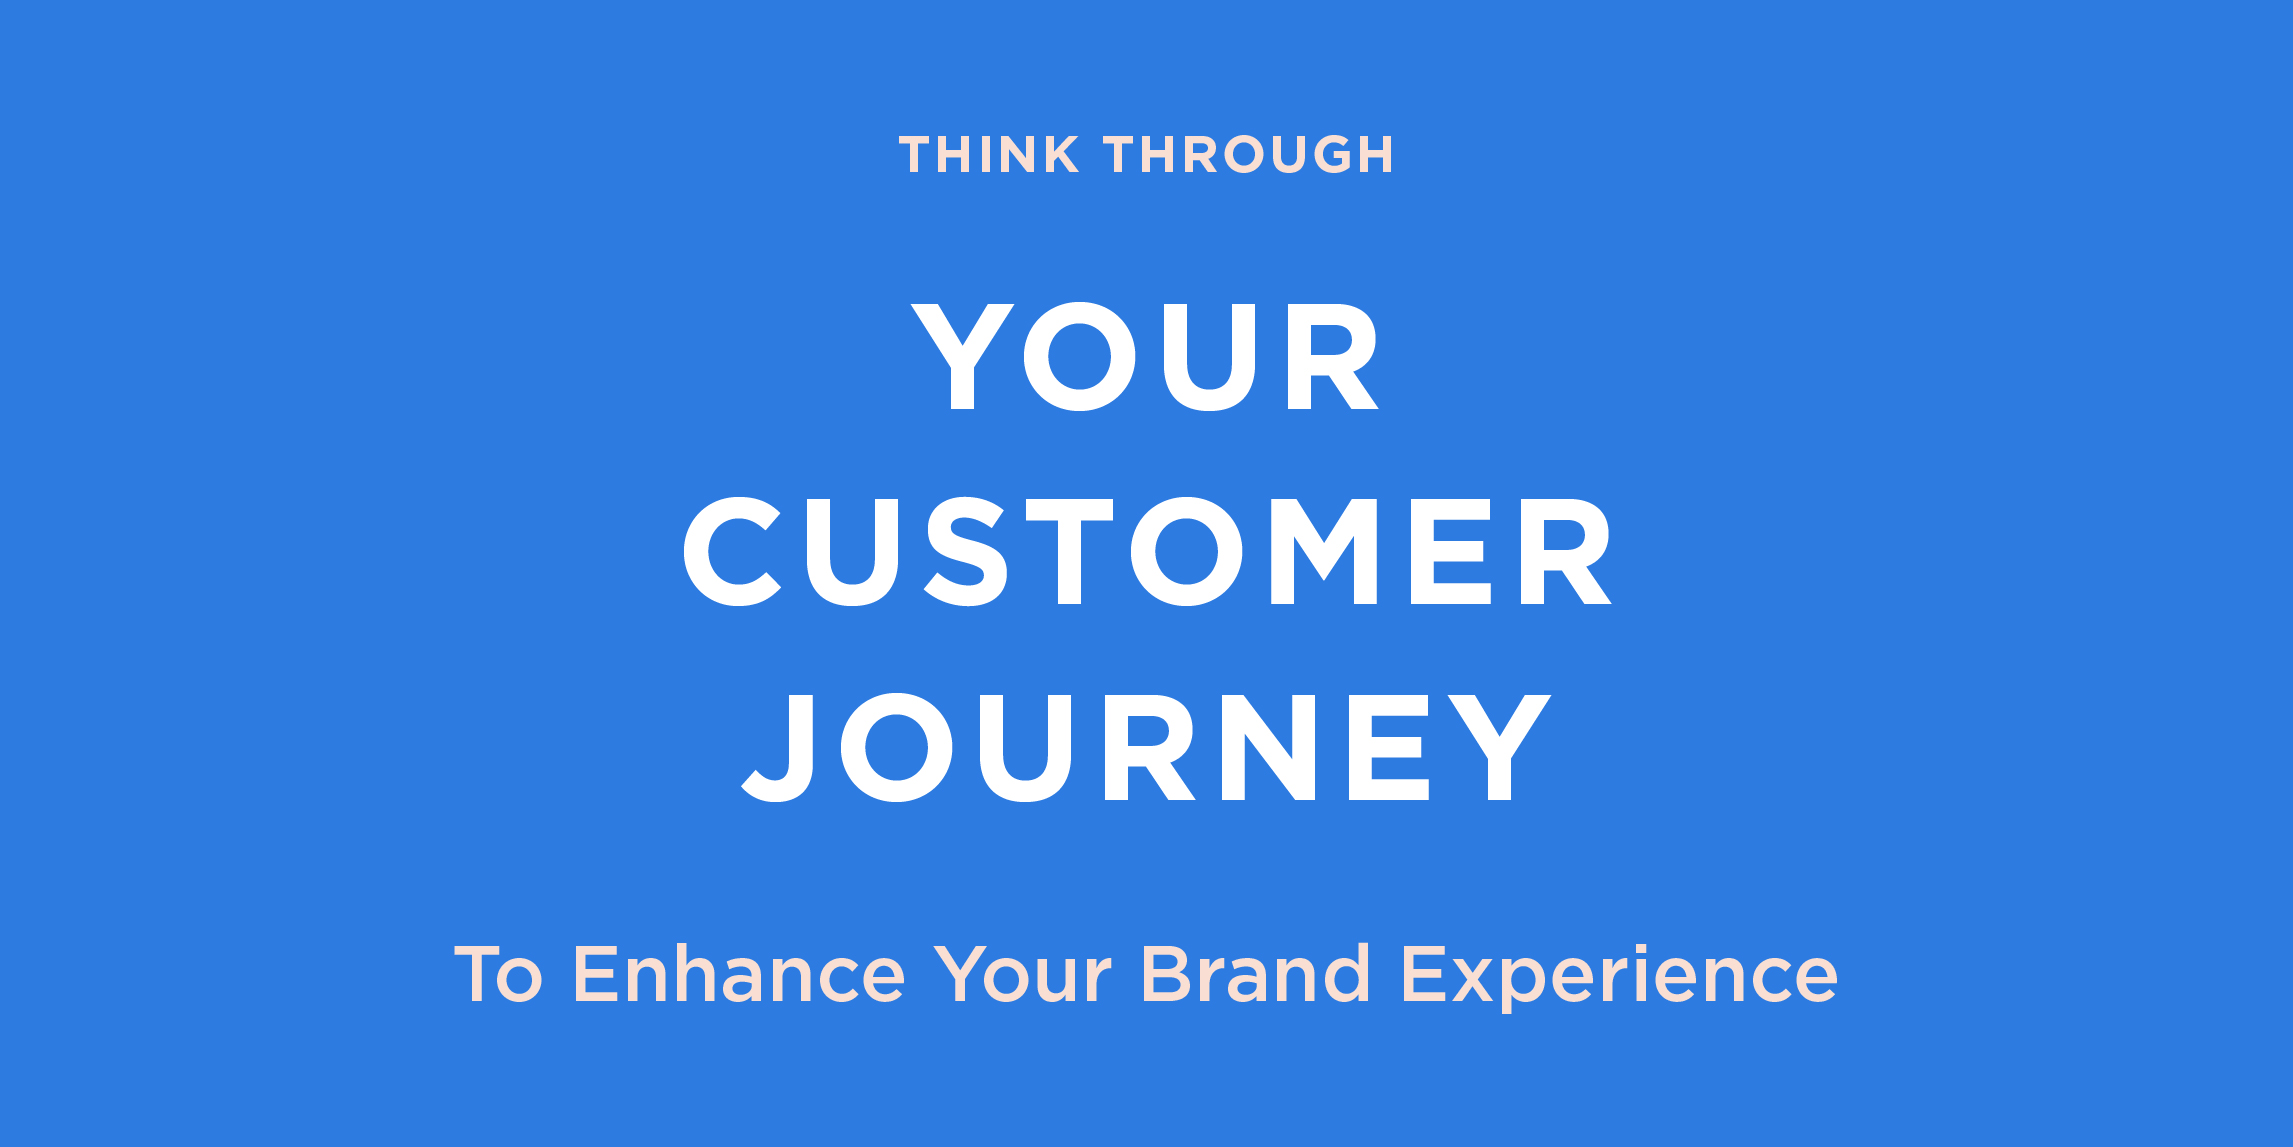 Think through your customer journey to enhance your brand experience